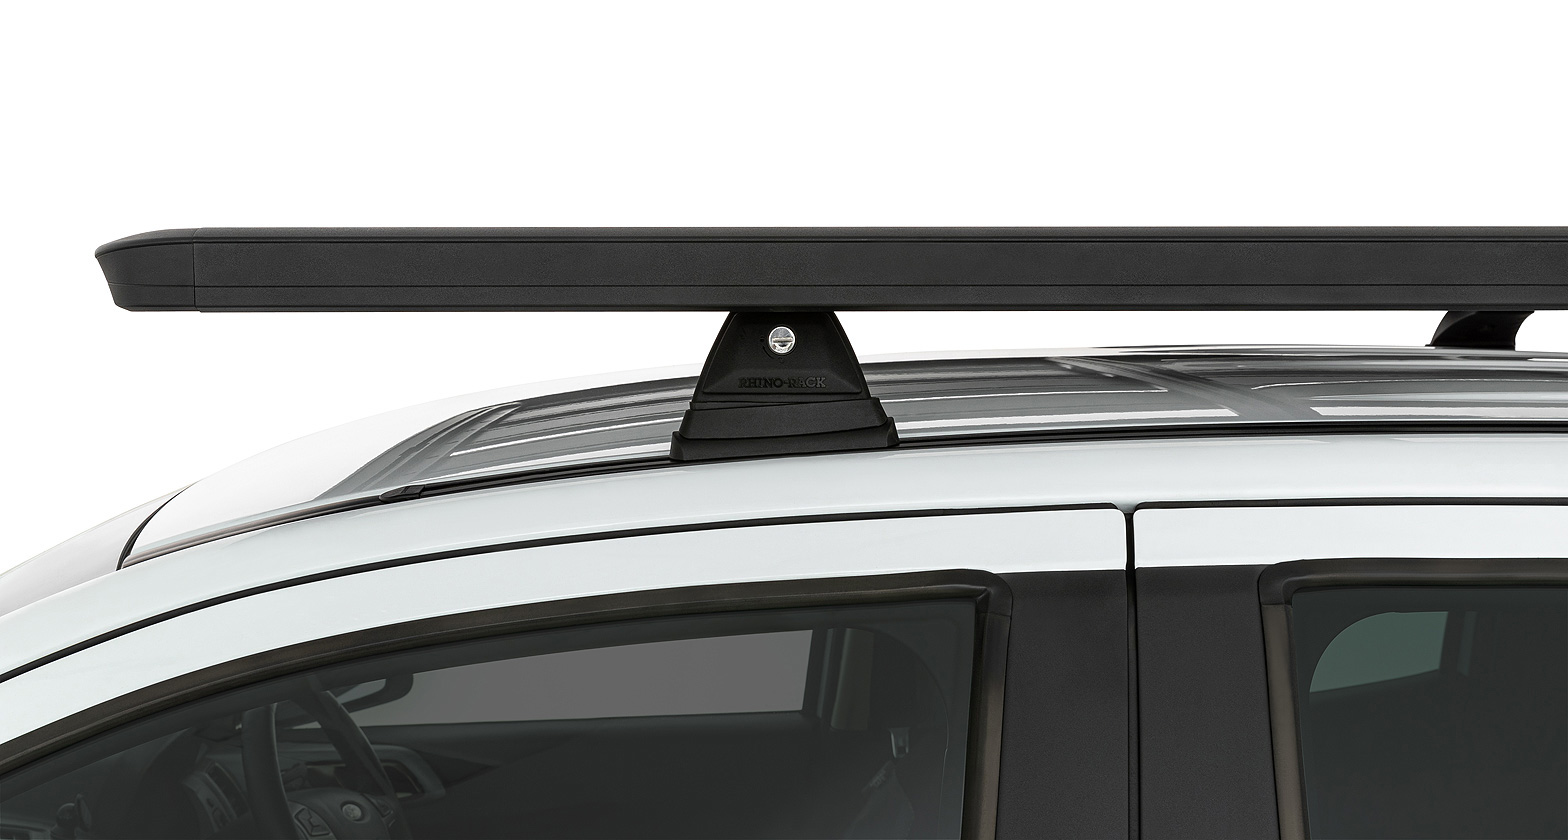 Rhino Rack JC-01677 Pioneer 6 Platform (1900mm x 1380mm) with RCH legs for Lexus LX570 5dr SUV with Factory Mounting Point (2007 to 2015) - Factory Point Mount